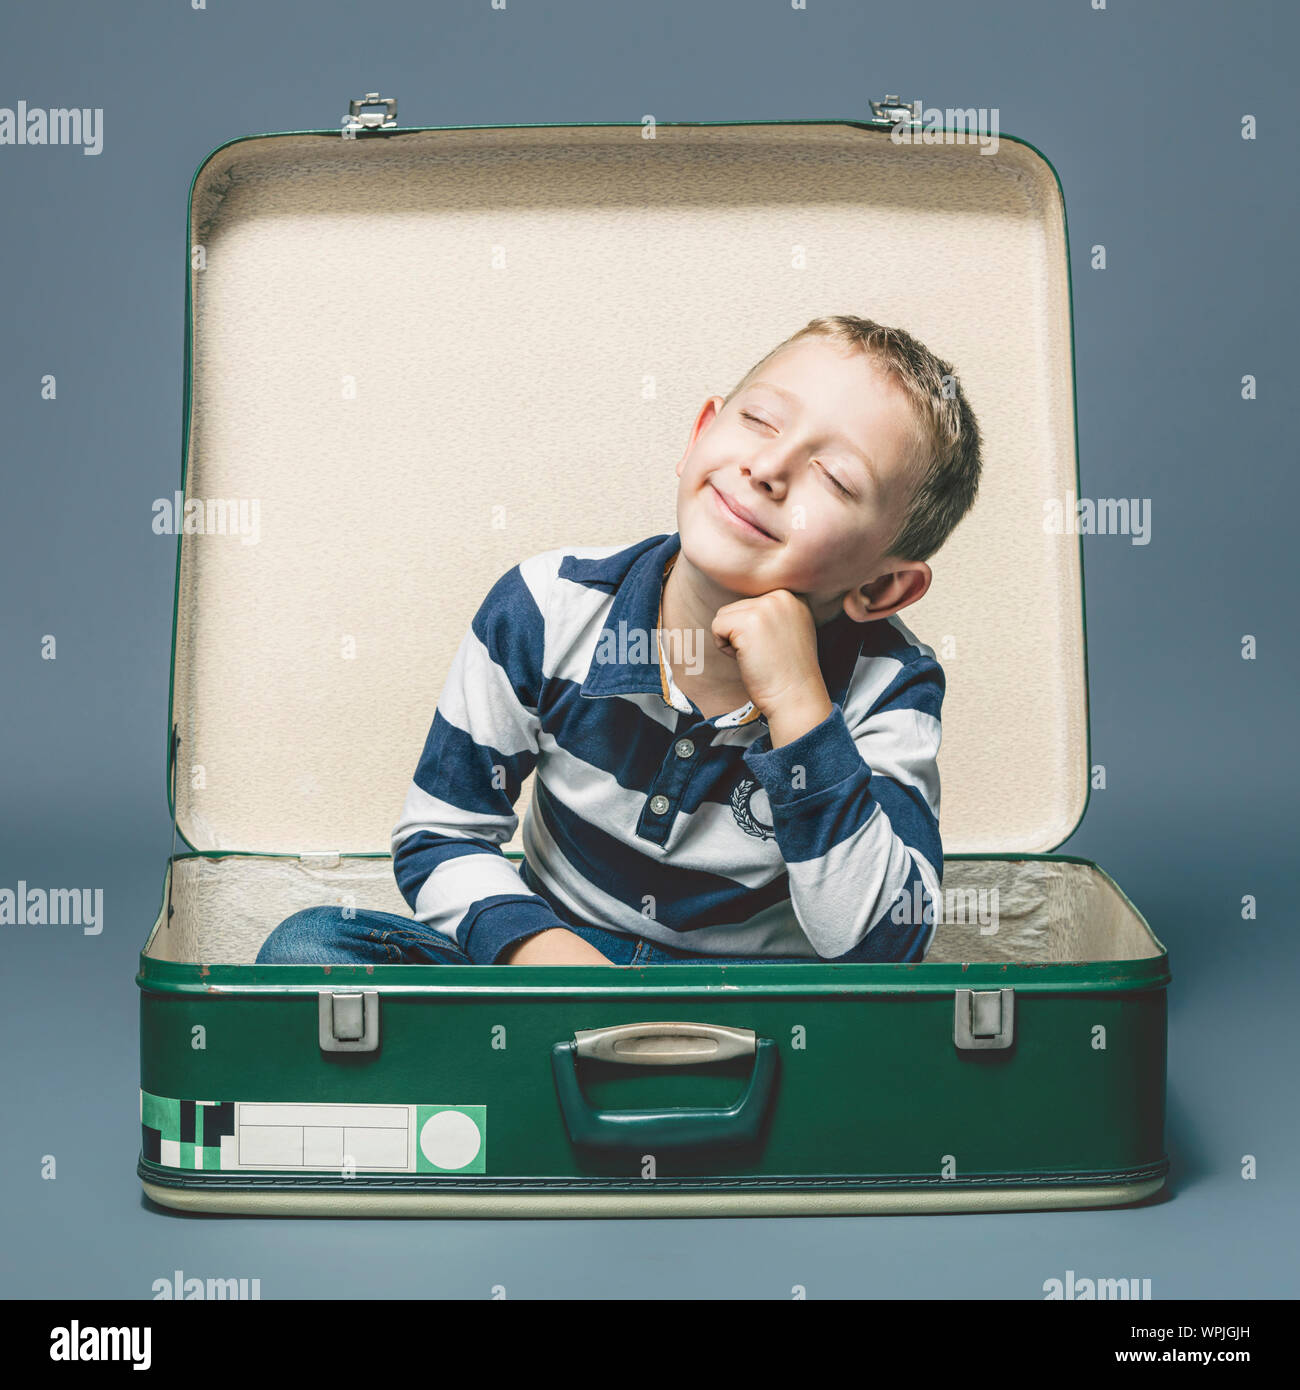 child sitting in an old suitcase smiles imagining a journey or an adventure. Stock Photo